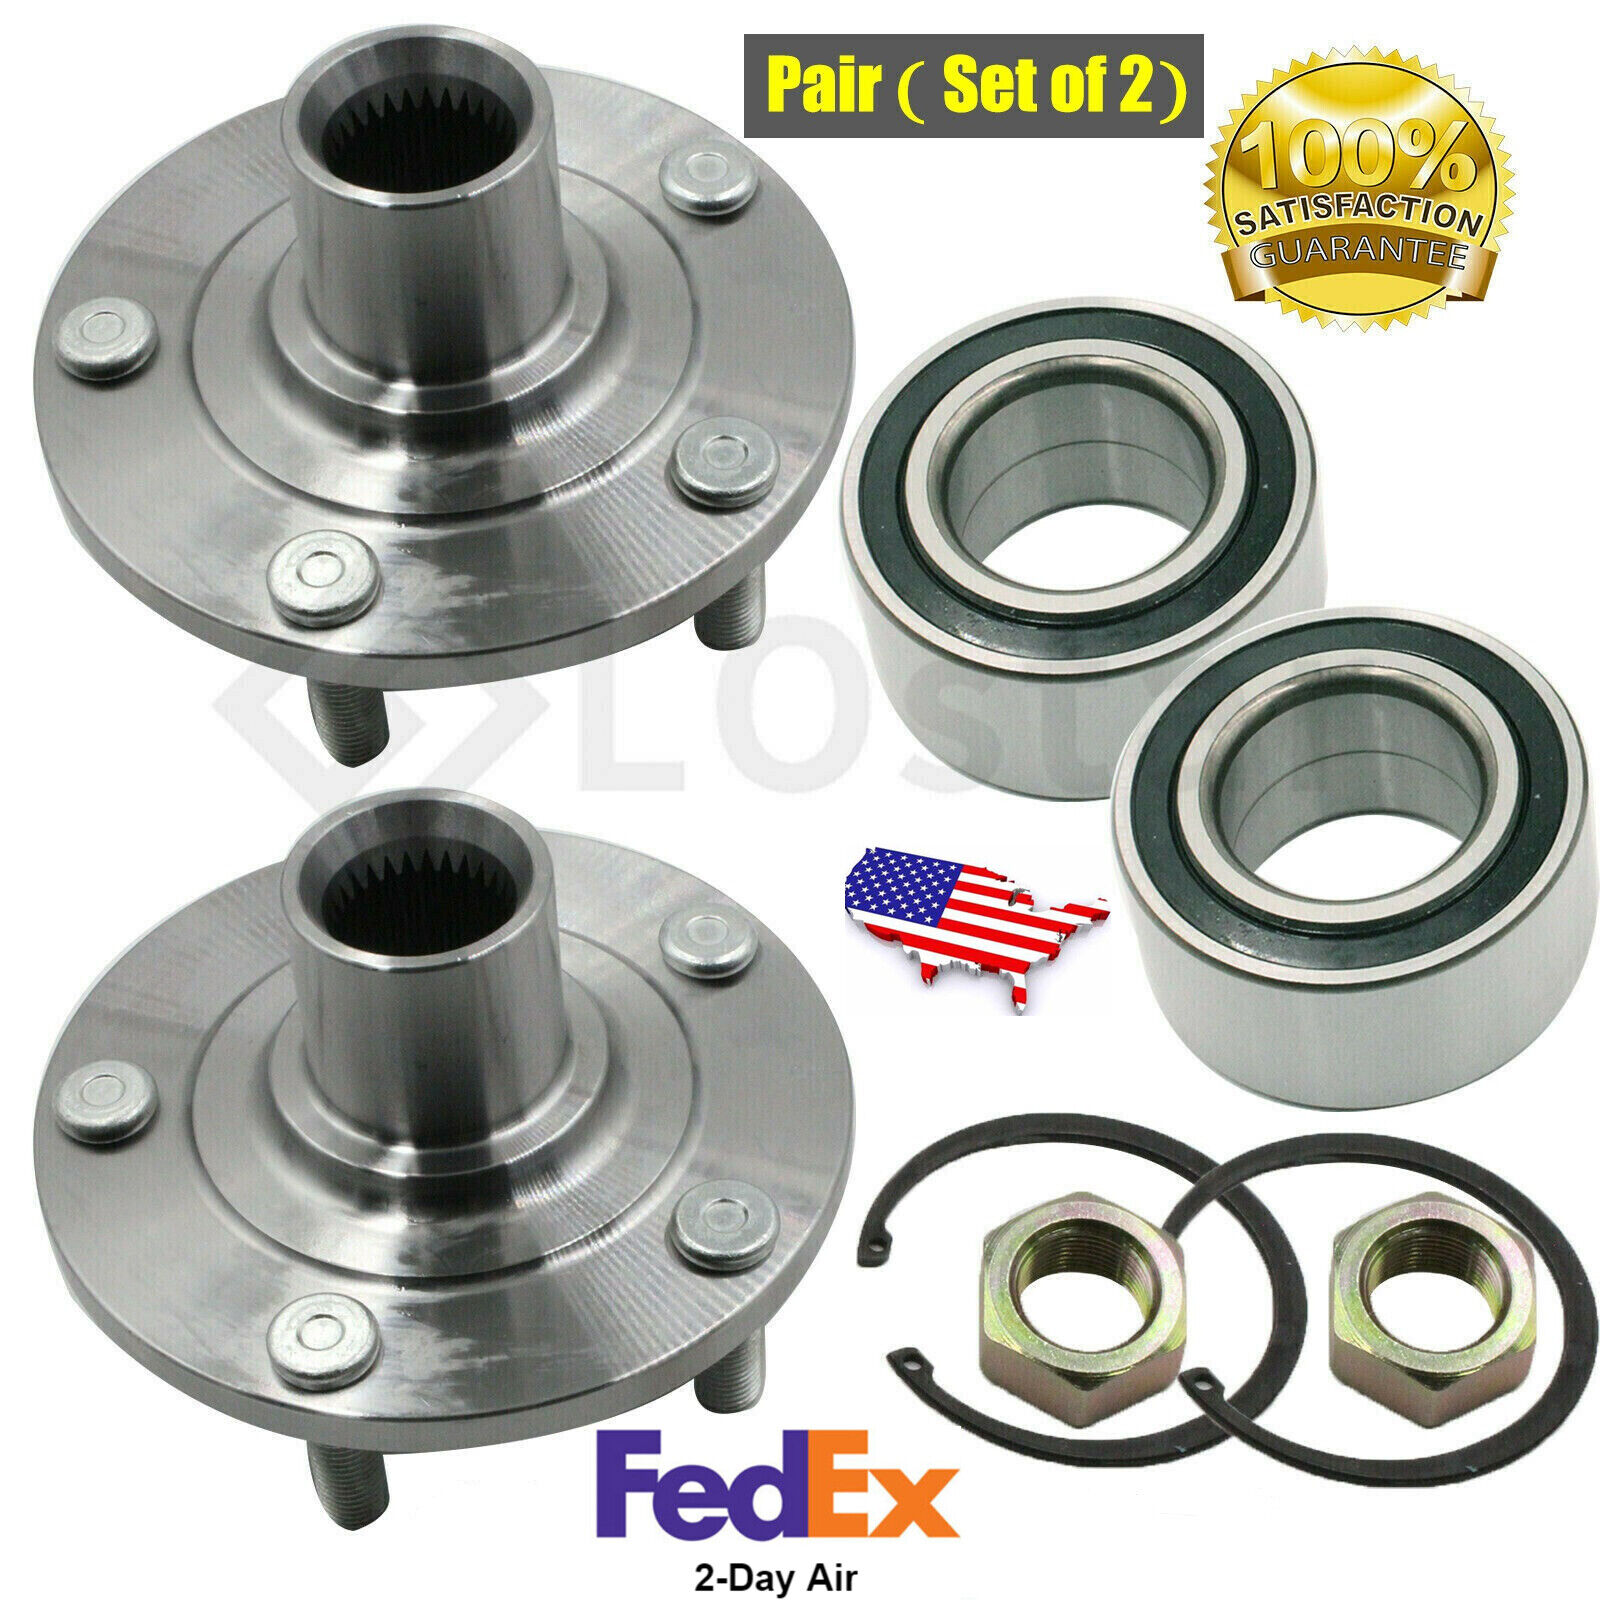 Pair(2) Front Wheel Hub & Bearing Assembly Fits Jeep Compass Dodge Caliber